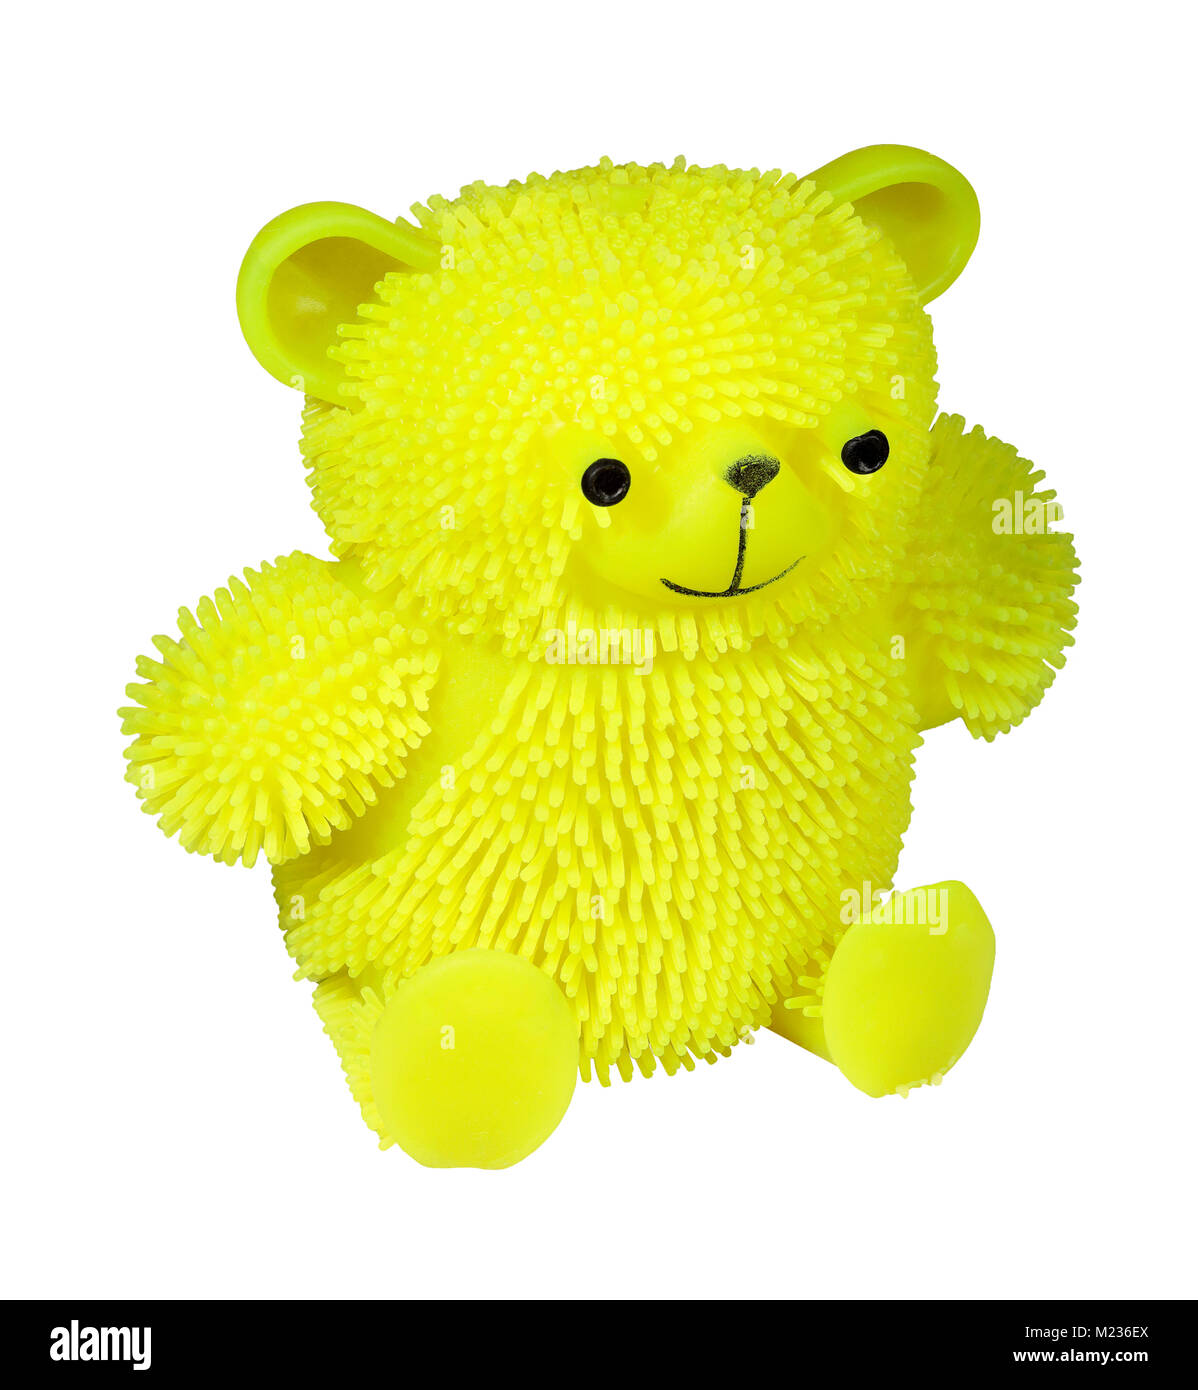 Bright yellow puffer stress ball teddy bear cat toy isolated on a white background Stock Photo